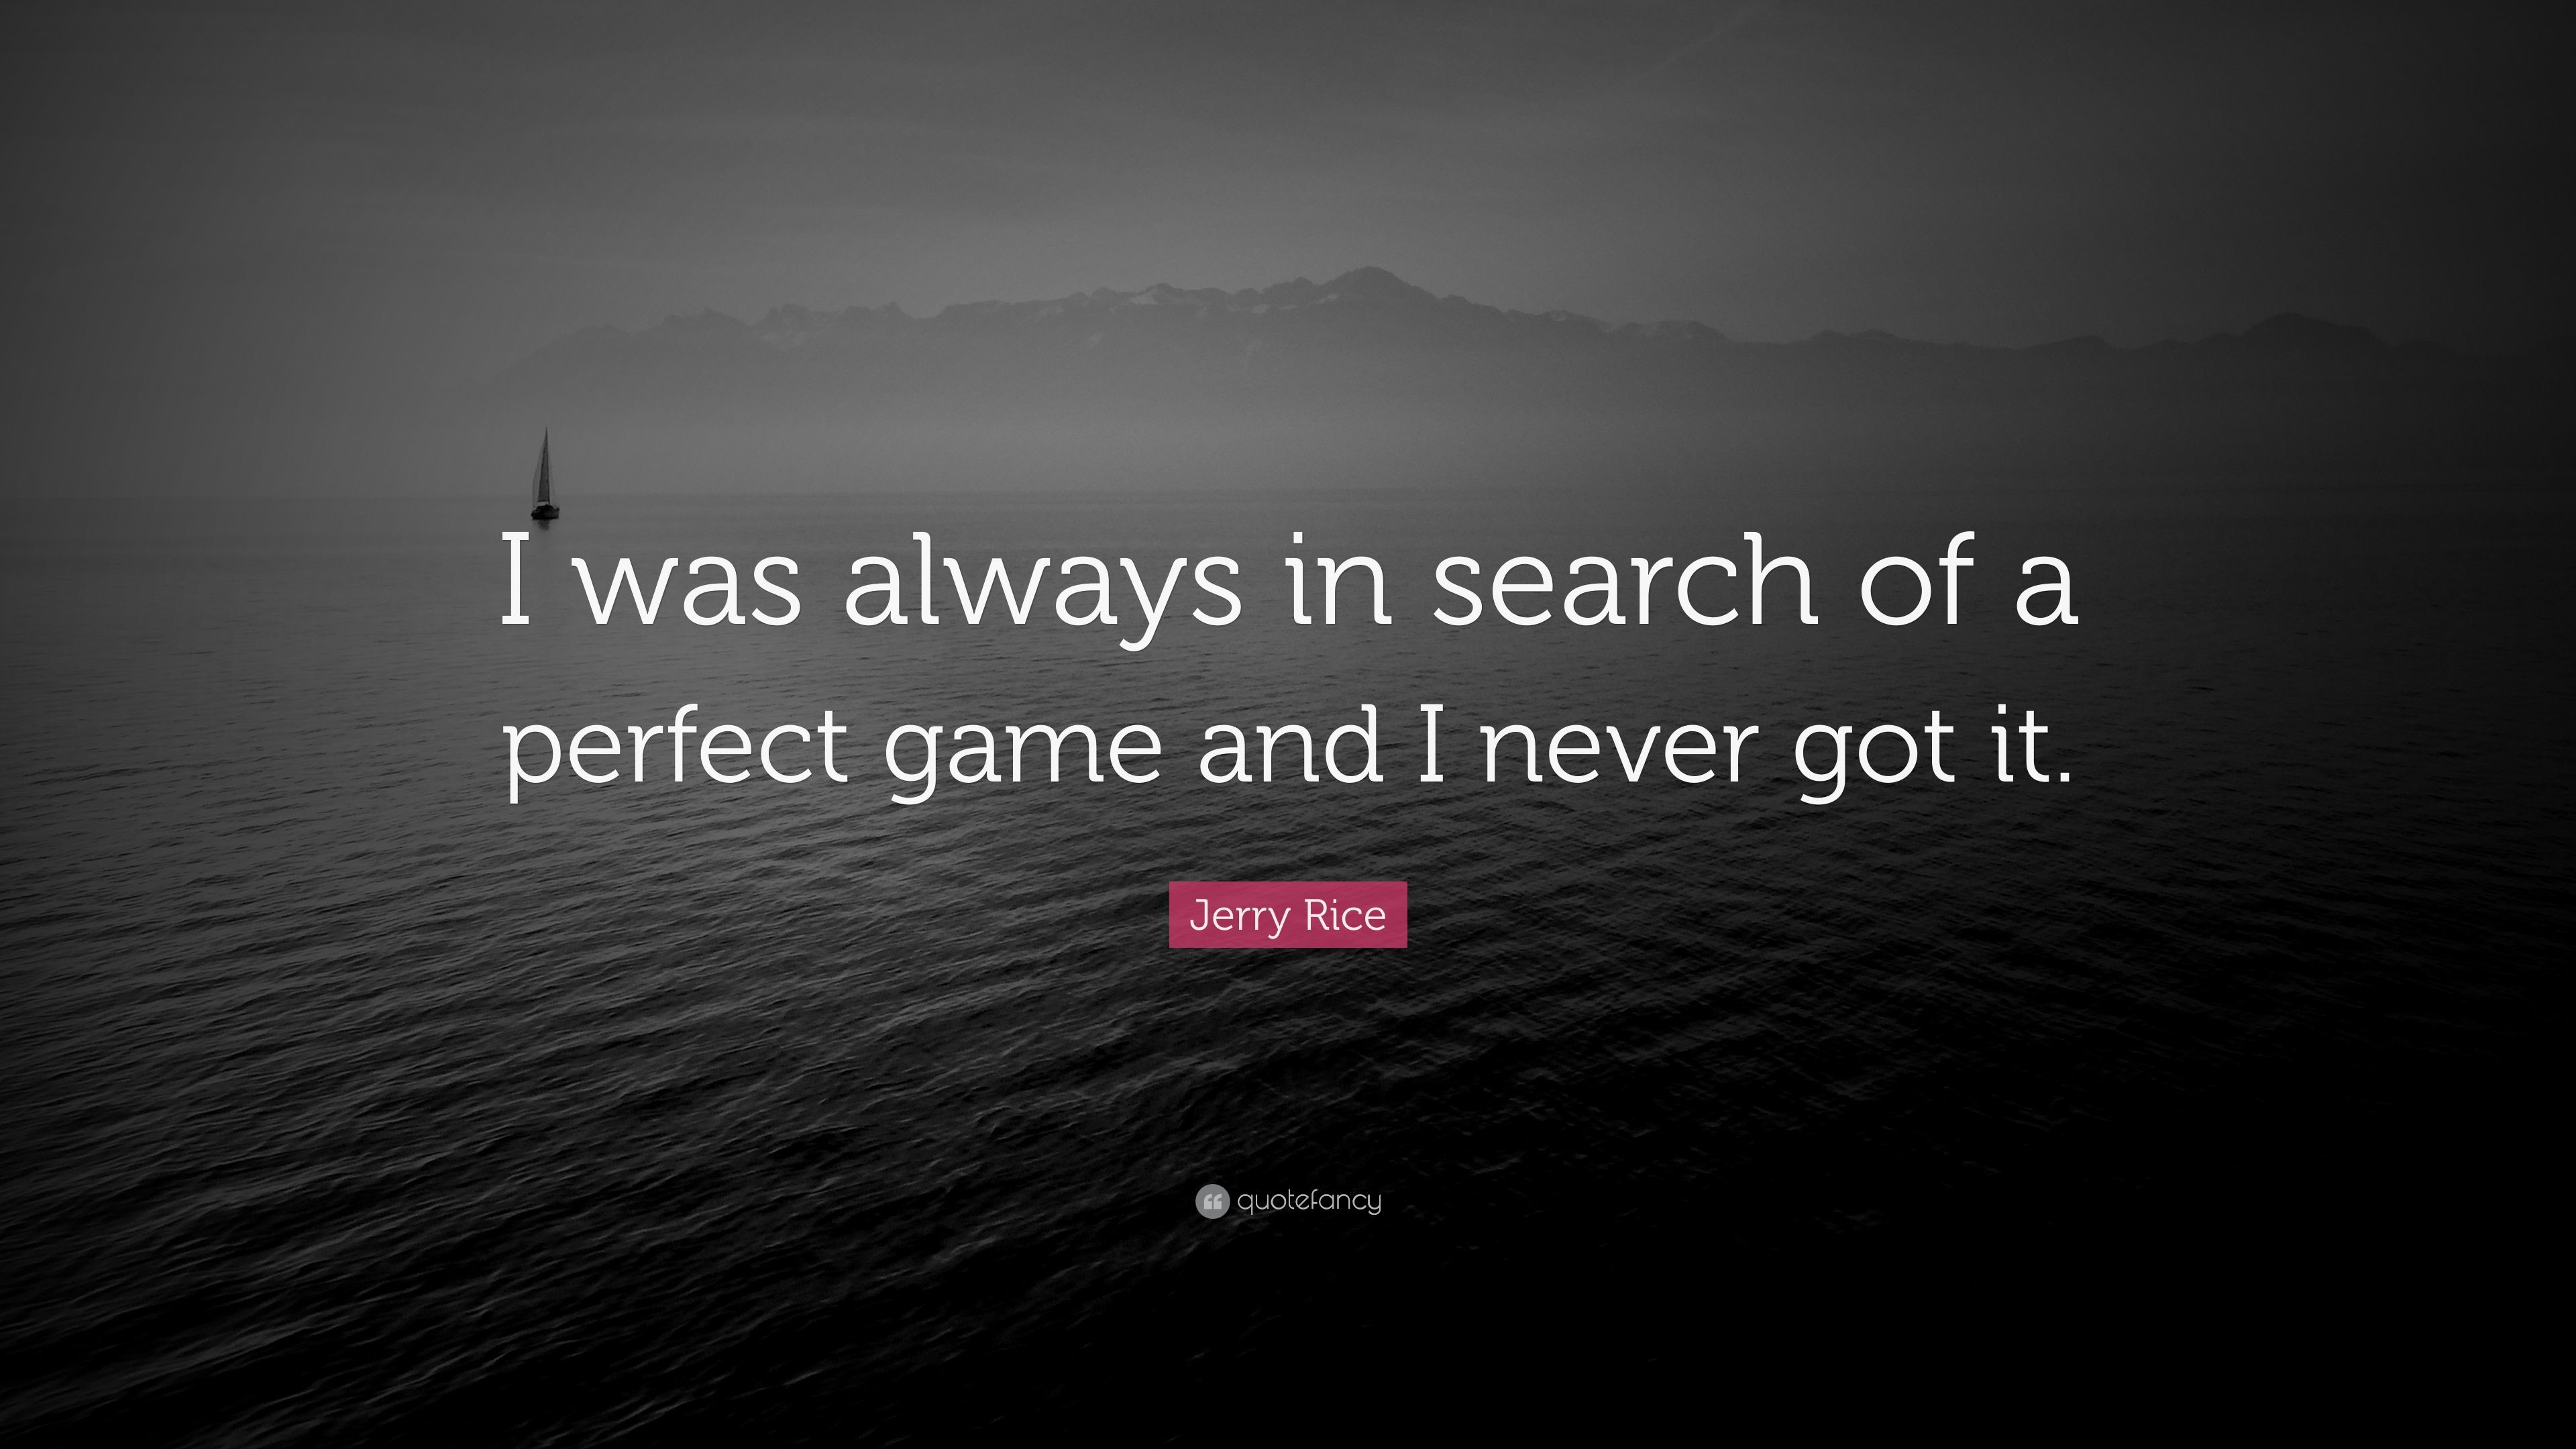 Jerry Rice Quote: “I was always in search of a perfect game and I